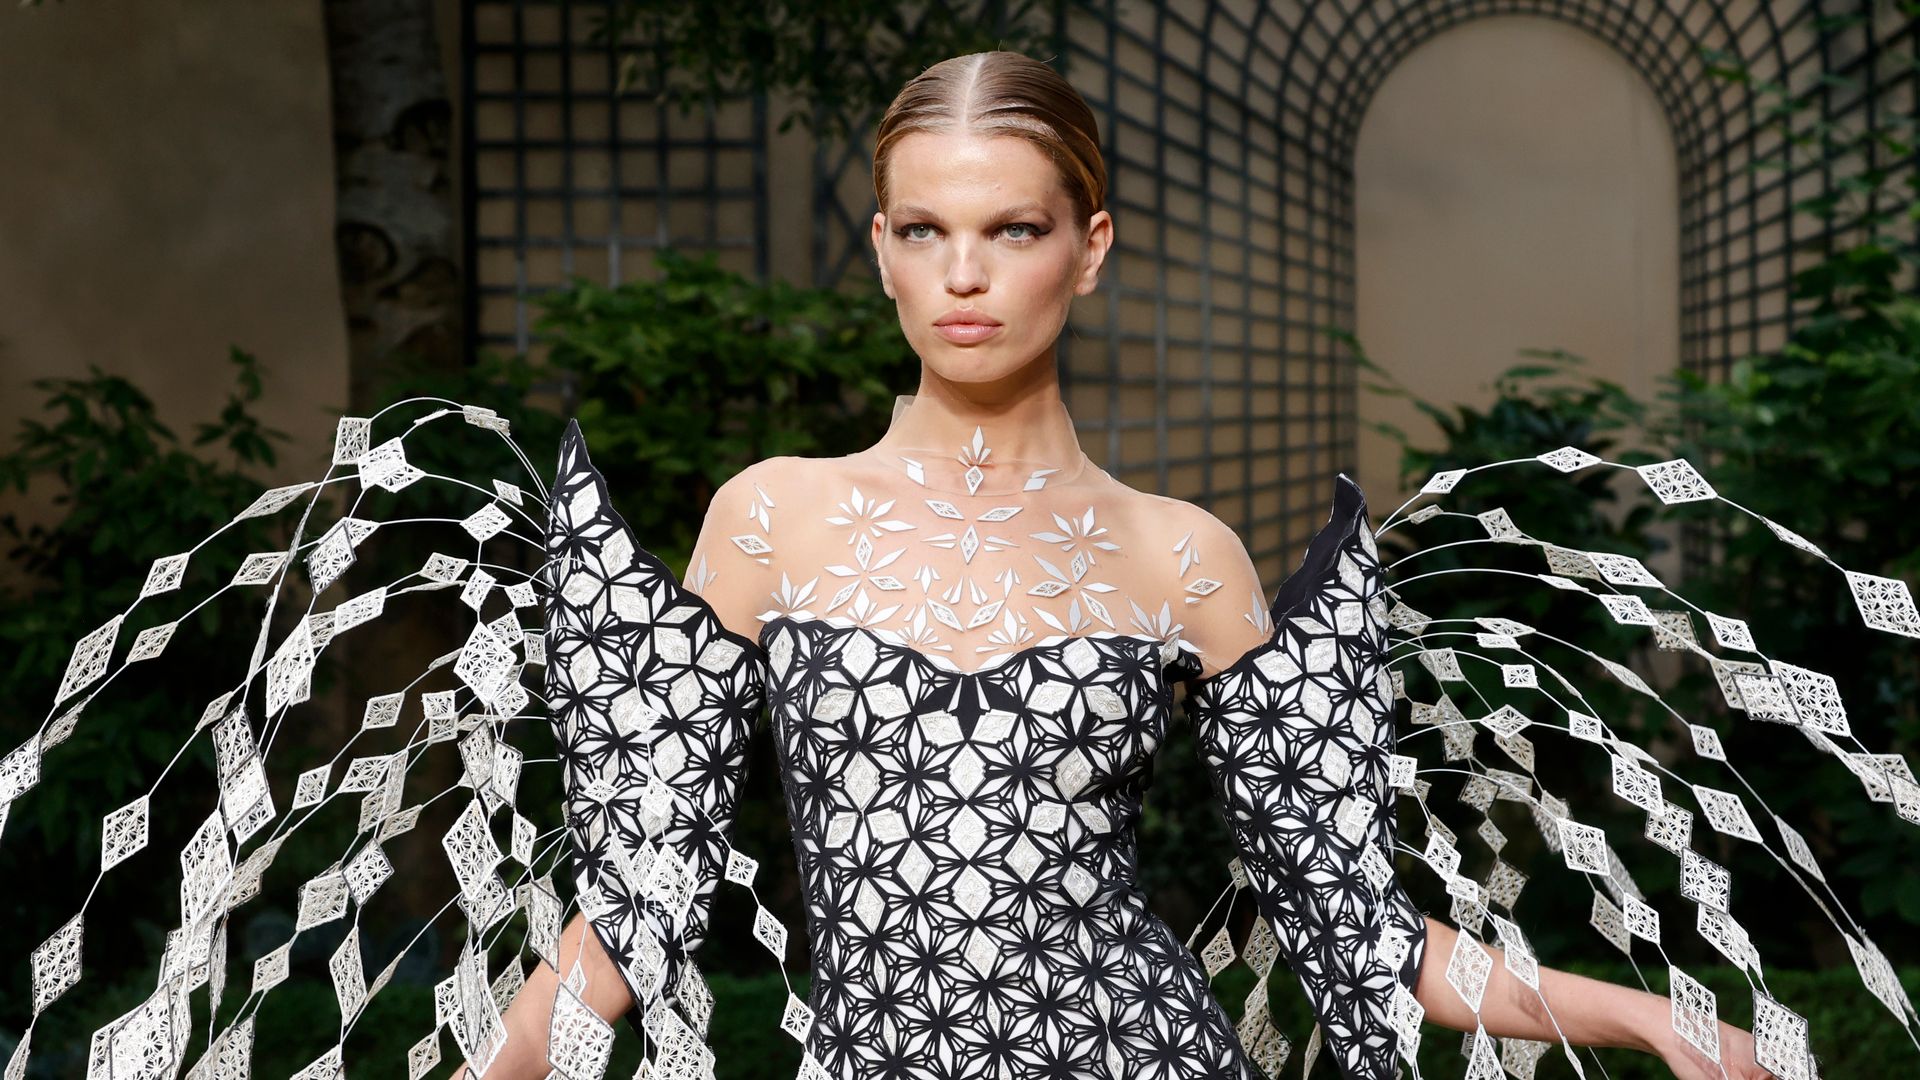 A model walks the runway in a patterned dress with diamond avant-garde detailing 